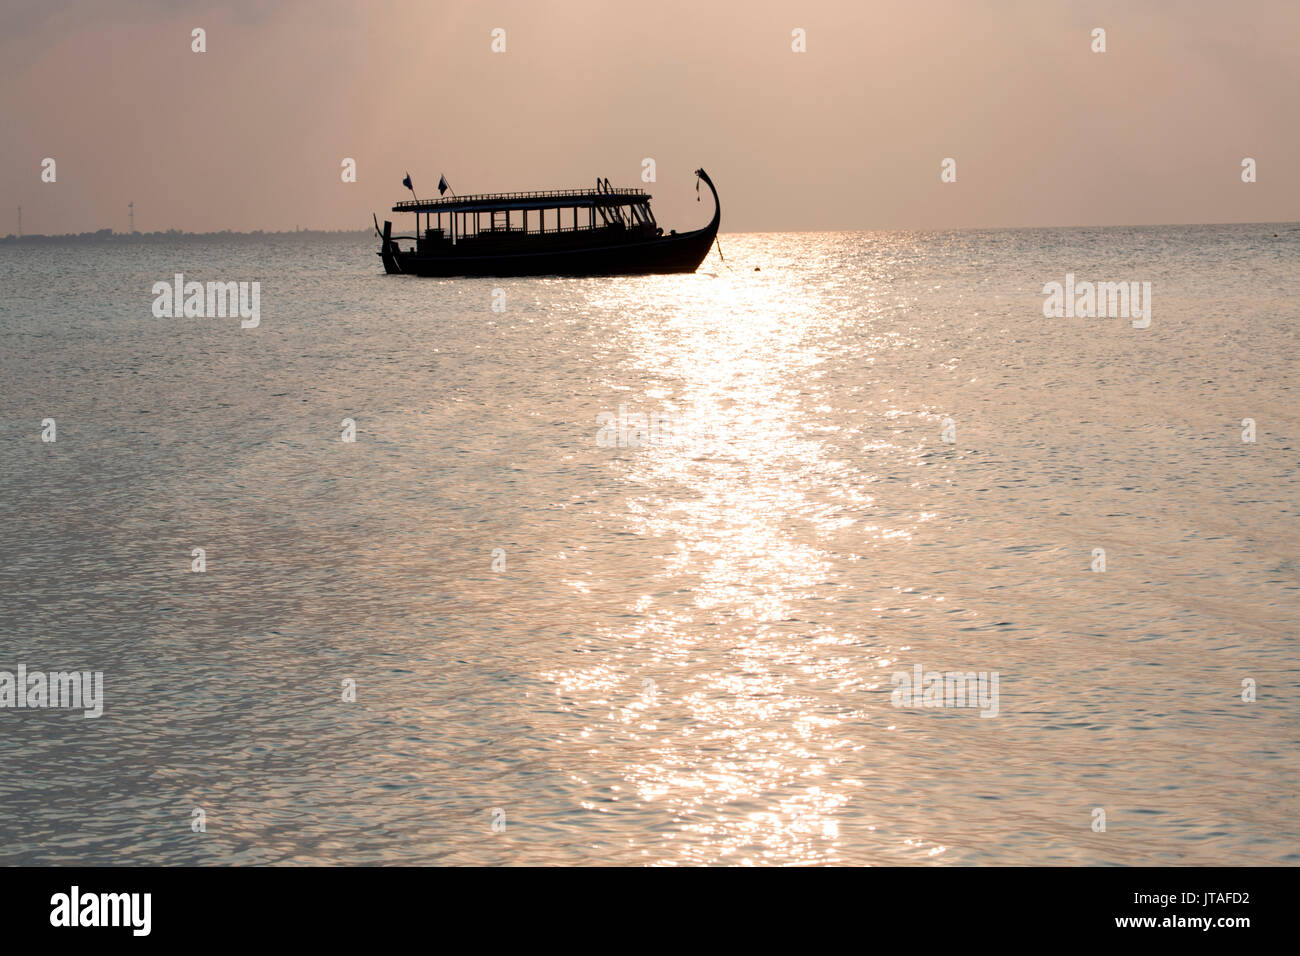 Wooden boat in silhouette at sunset, off Dhuni Kolhu, Baa Atoll, Republic of Maldives, Indian Ocean, Asia Stock Photo